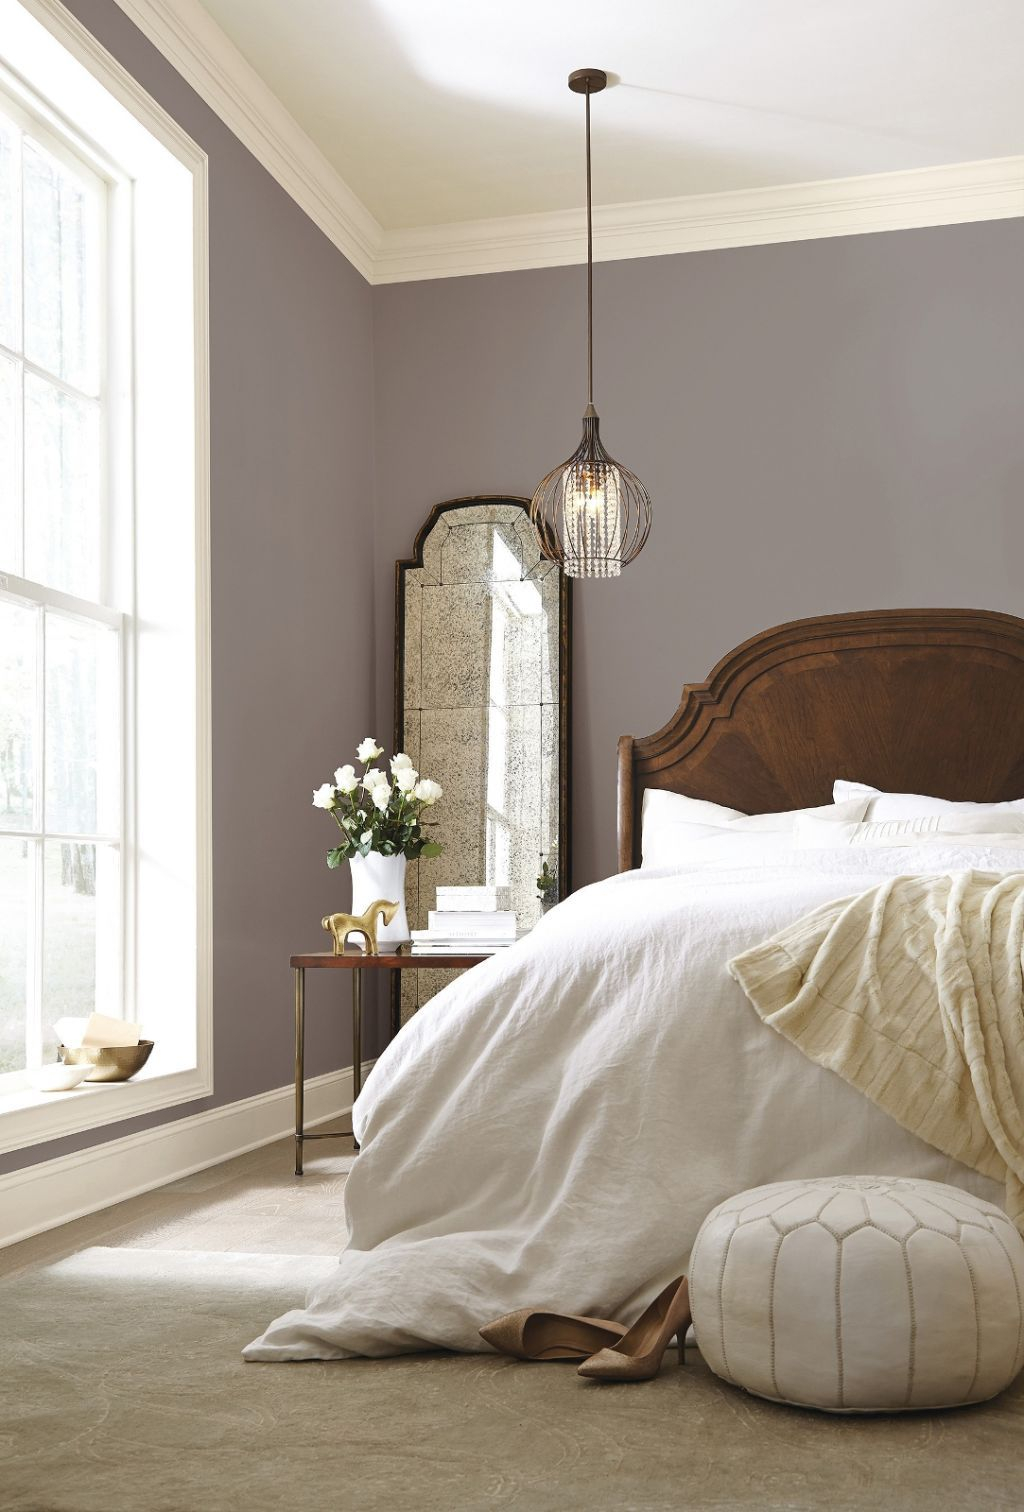 Sherwin Williams Just Announced The Color Of The Year A True Abode pertaining to sizing 1024 X 1512